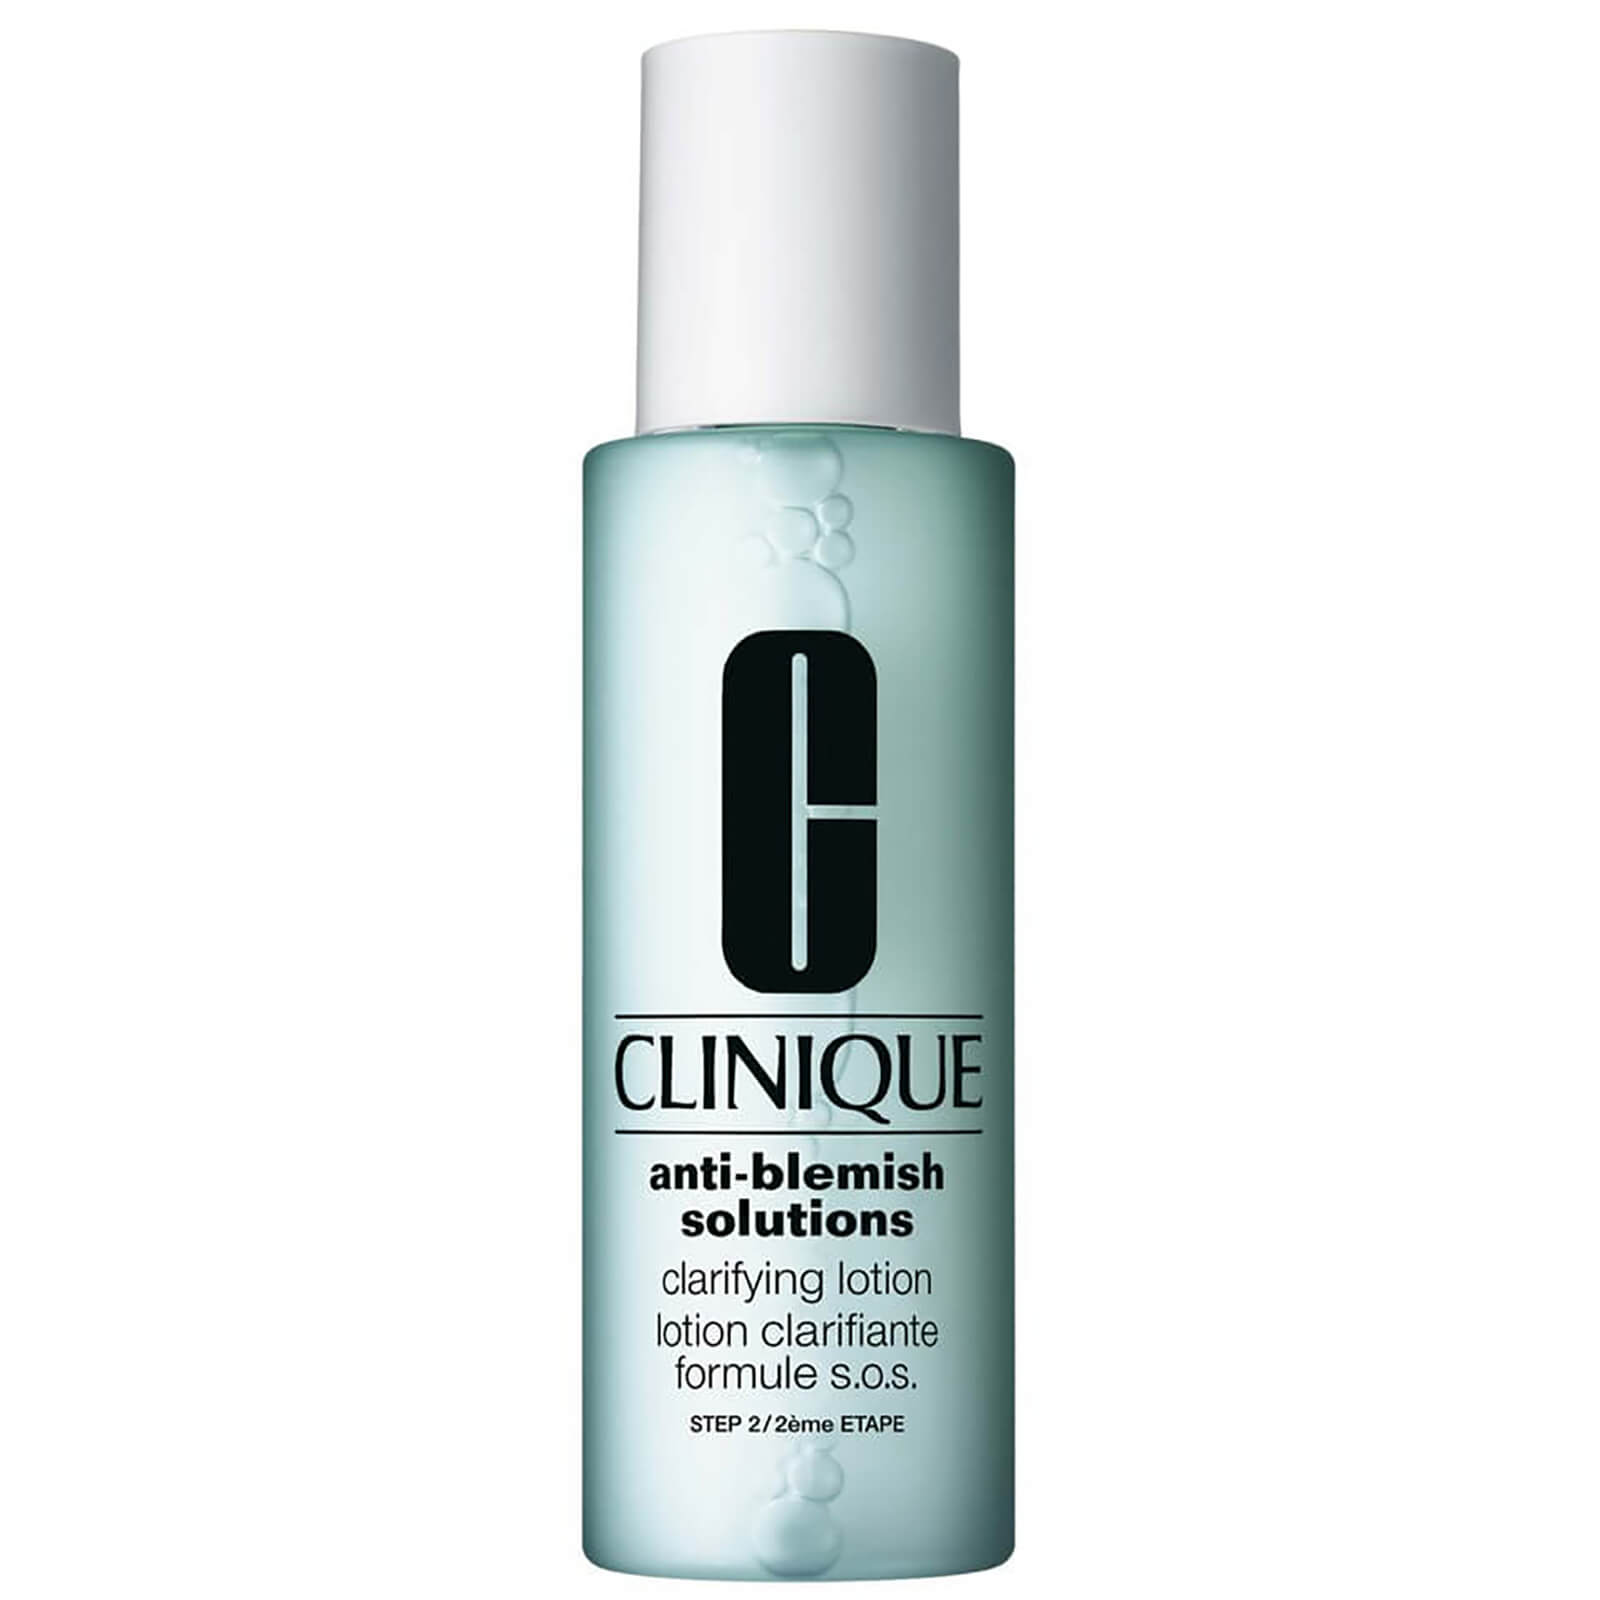 Clinique Anti Blemish Solutions Clarifying Lotion 200ml